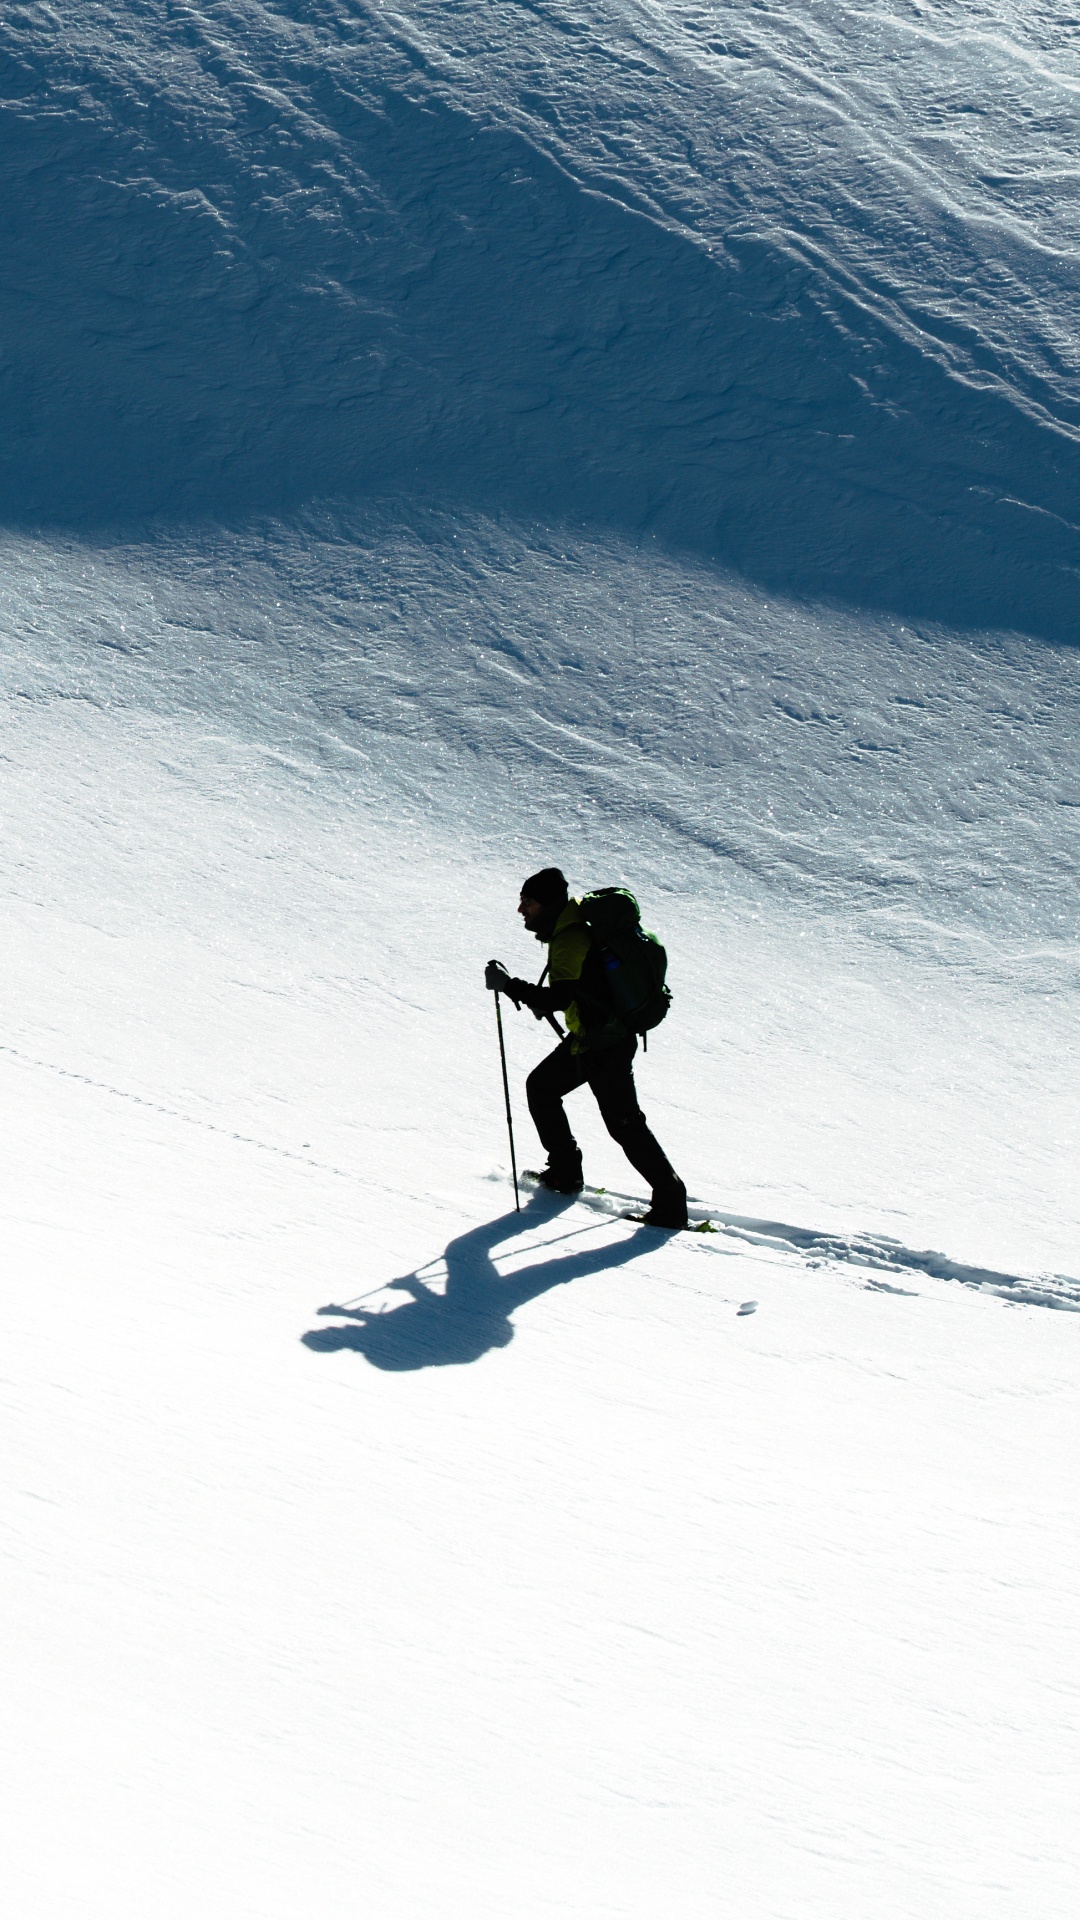 Man in Black Jacket and Pants Riding on Snowboard During Daytime. Wallpaper in 1080x1920 Resolution